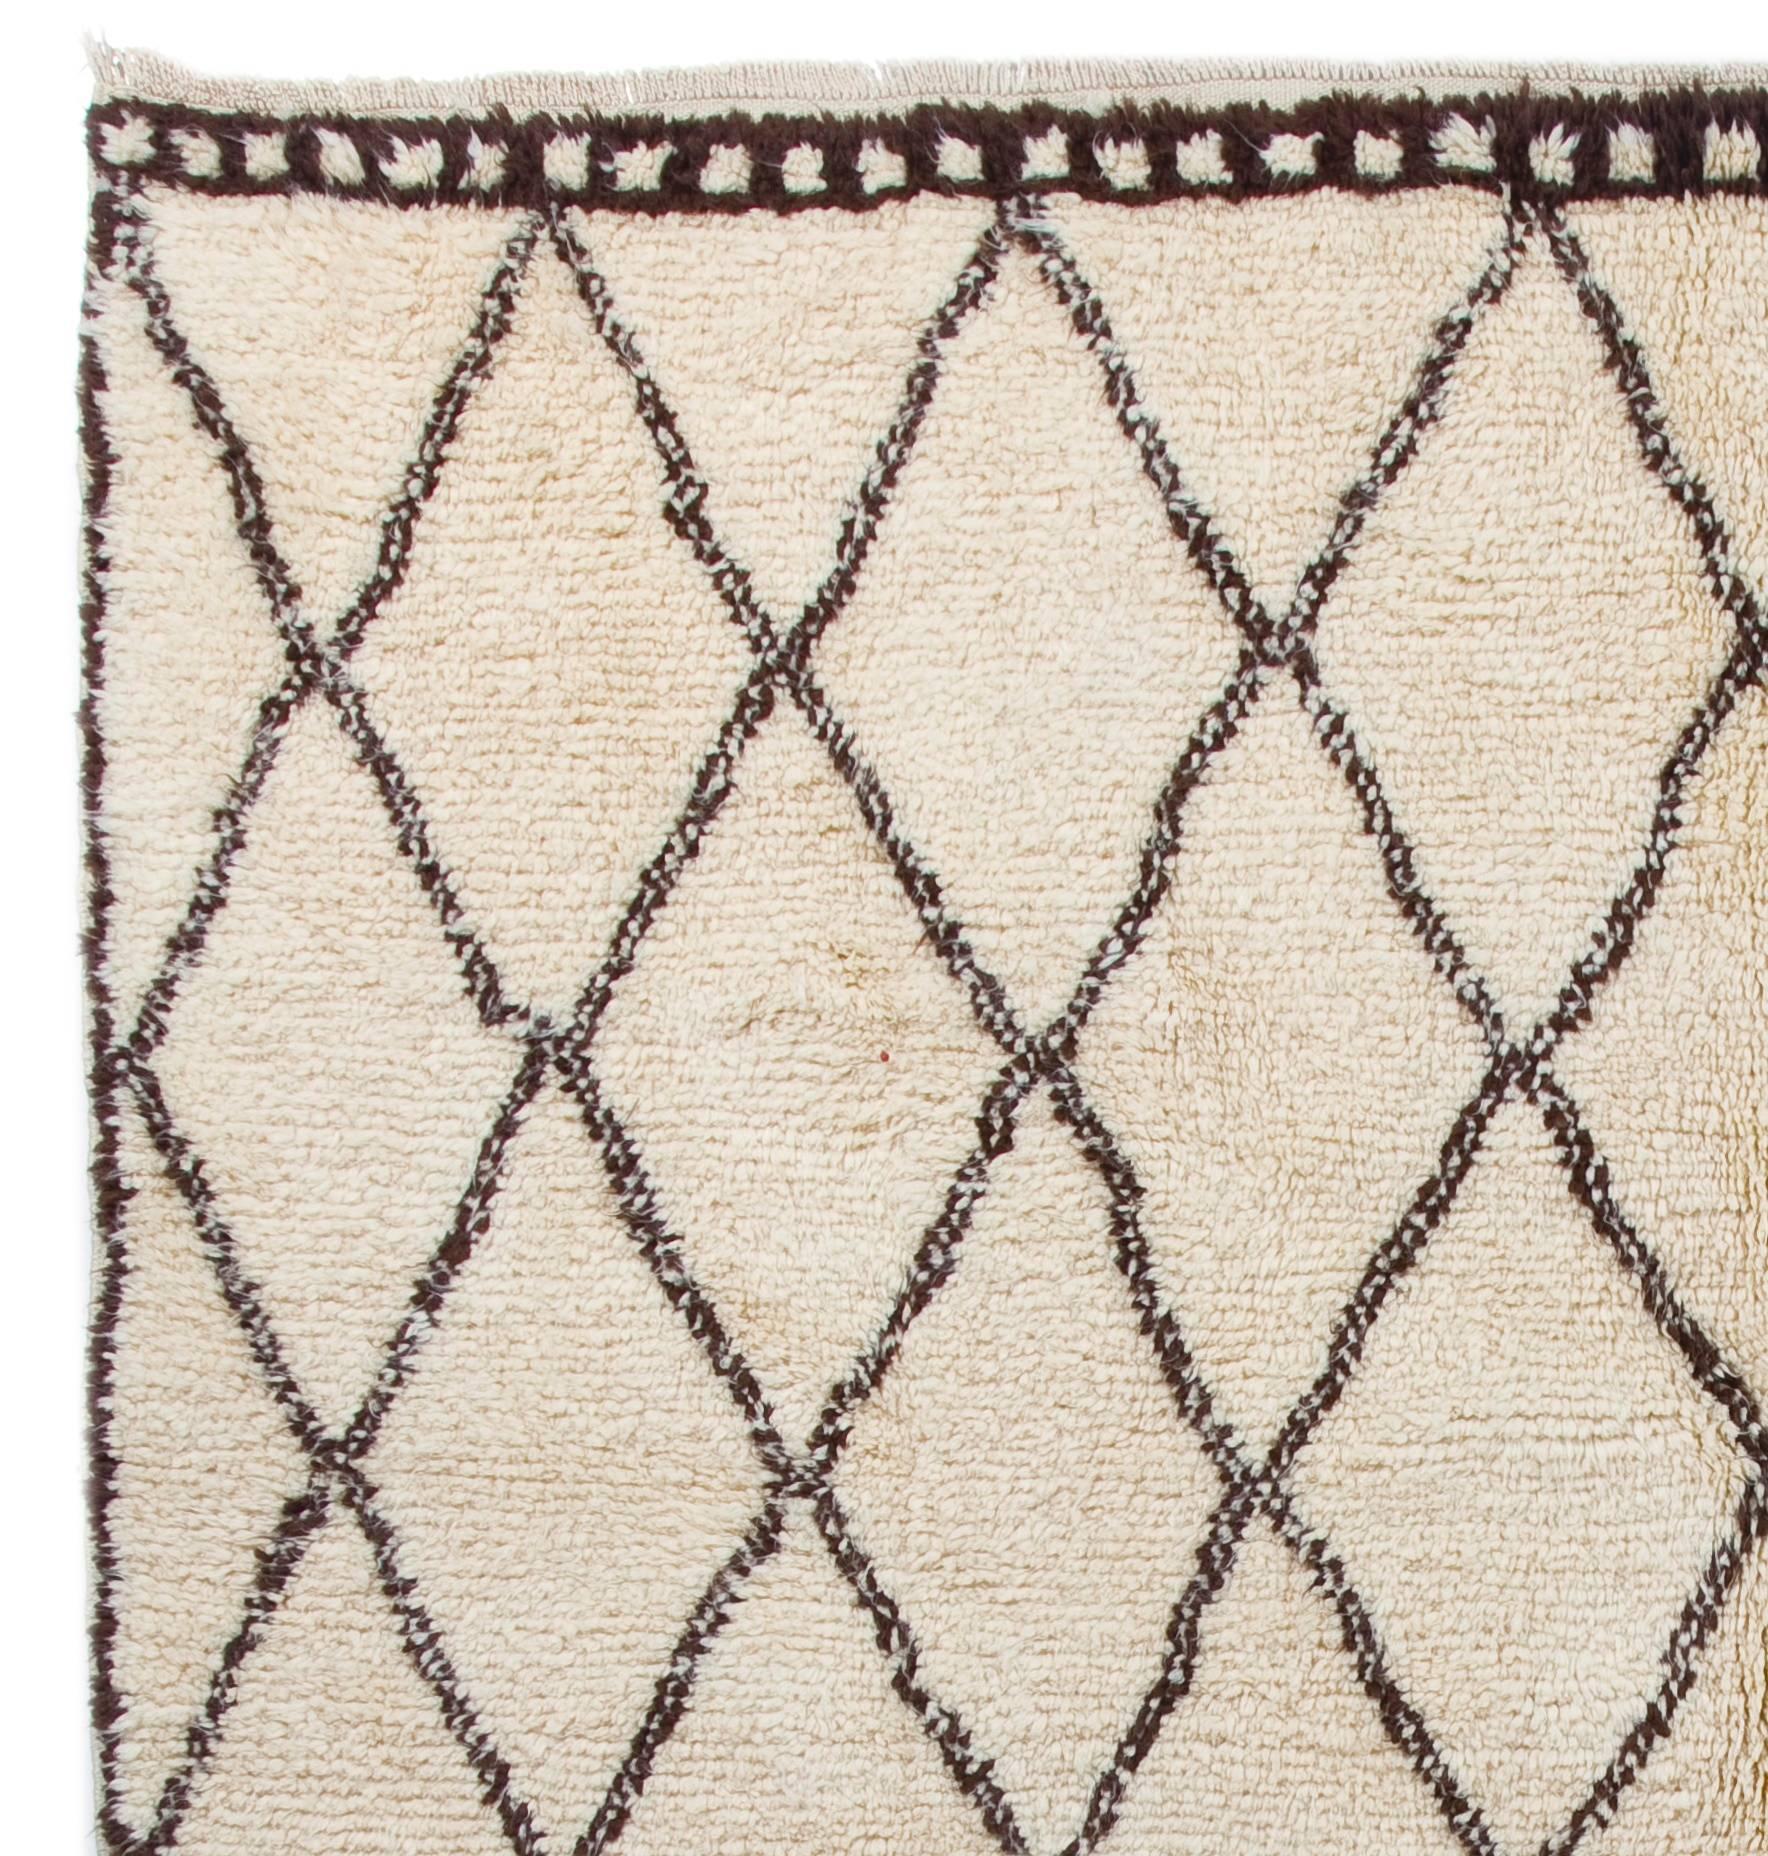 A contemporary hand-knotted Moroccan rug, made of un-dyed sheep's wool in ivory and brown. 
It has soft, lustrous wool pile that is ideal for families with kids and those who seek coziness and comfort with a modern, minimalist aesthetic. The rug